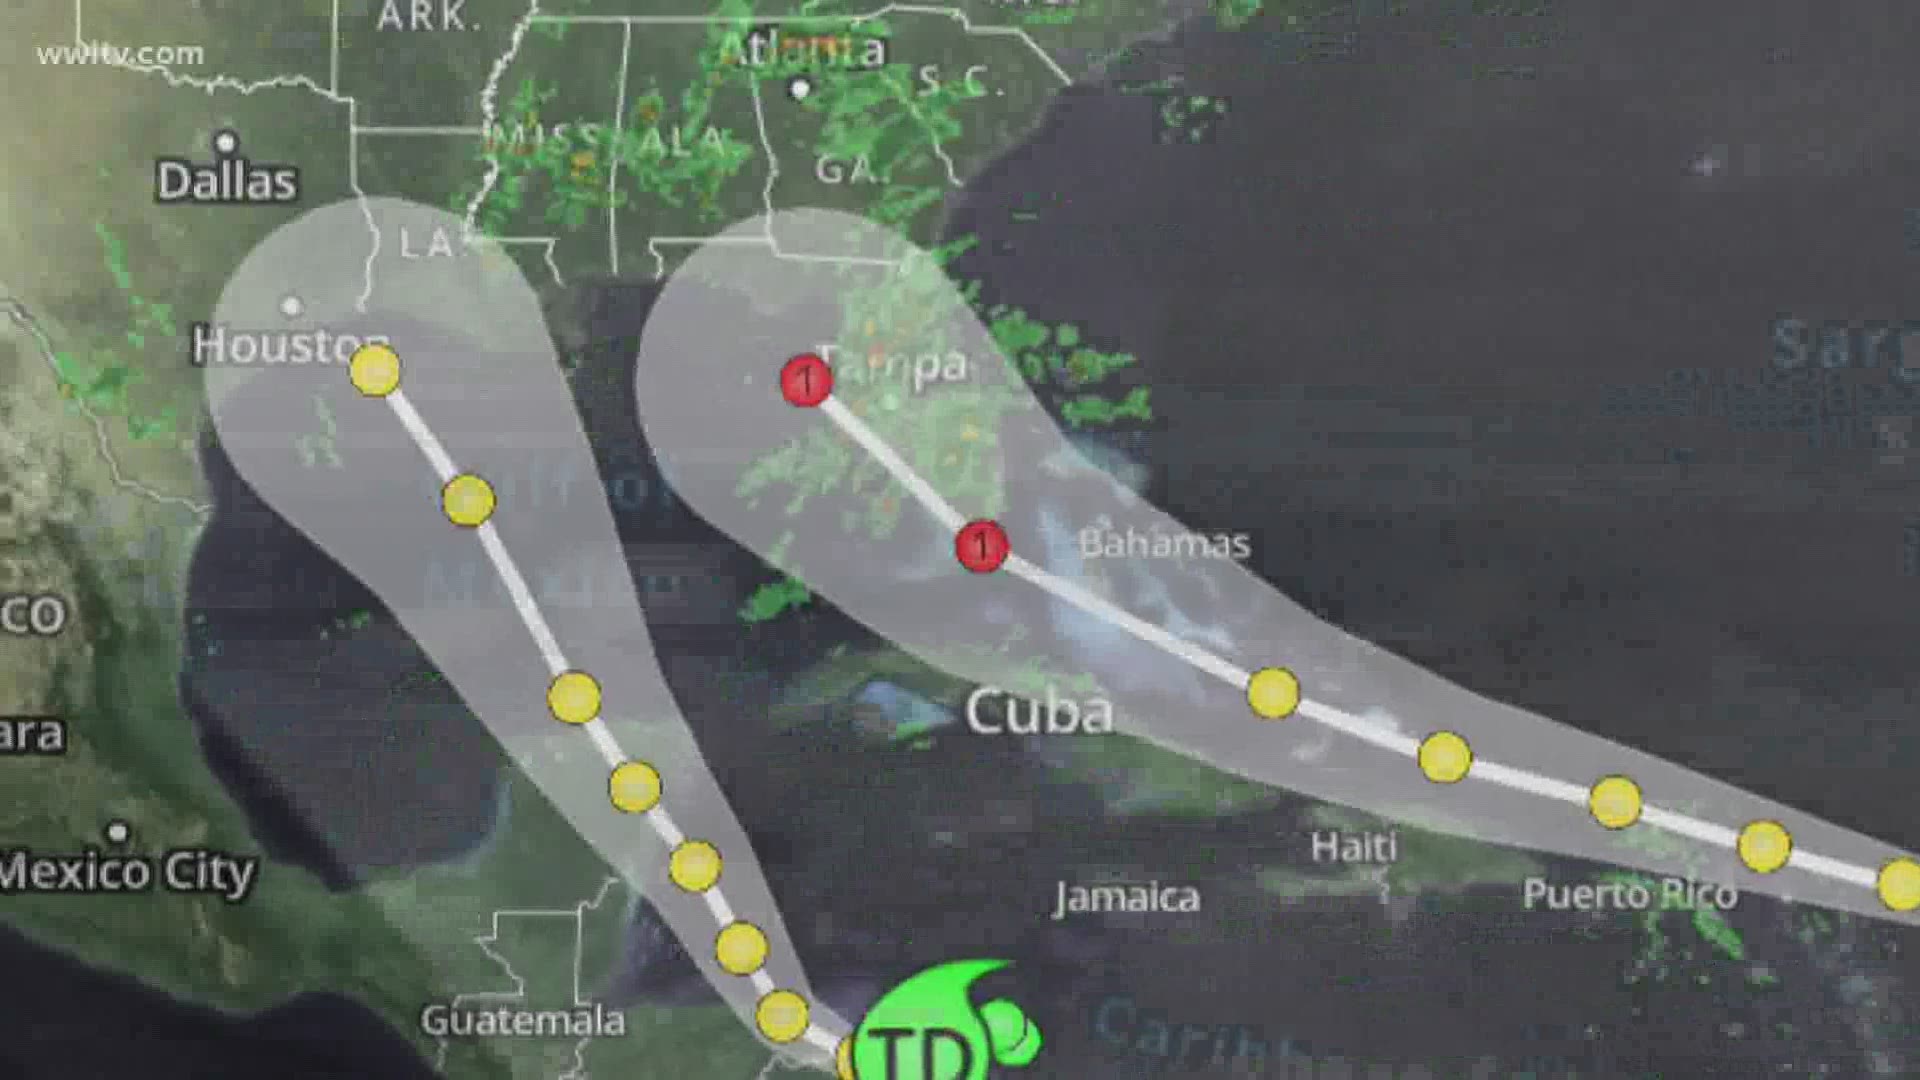 Meteorologists are tracking two storms that could turn into hurricanes in the coming days.